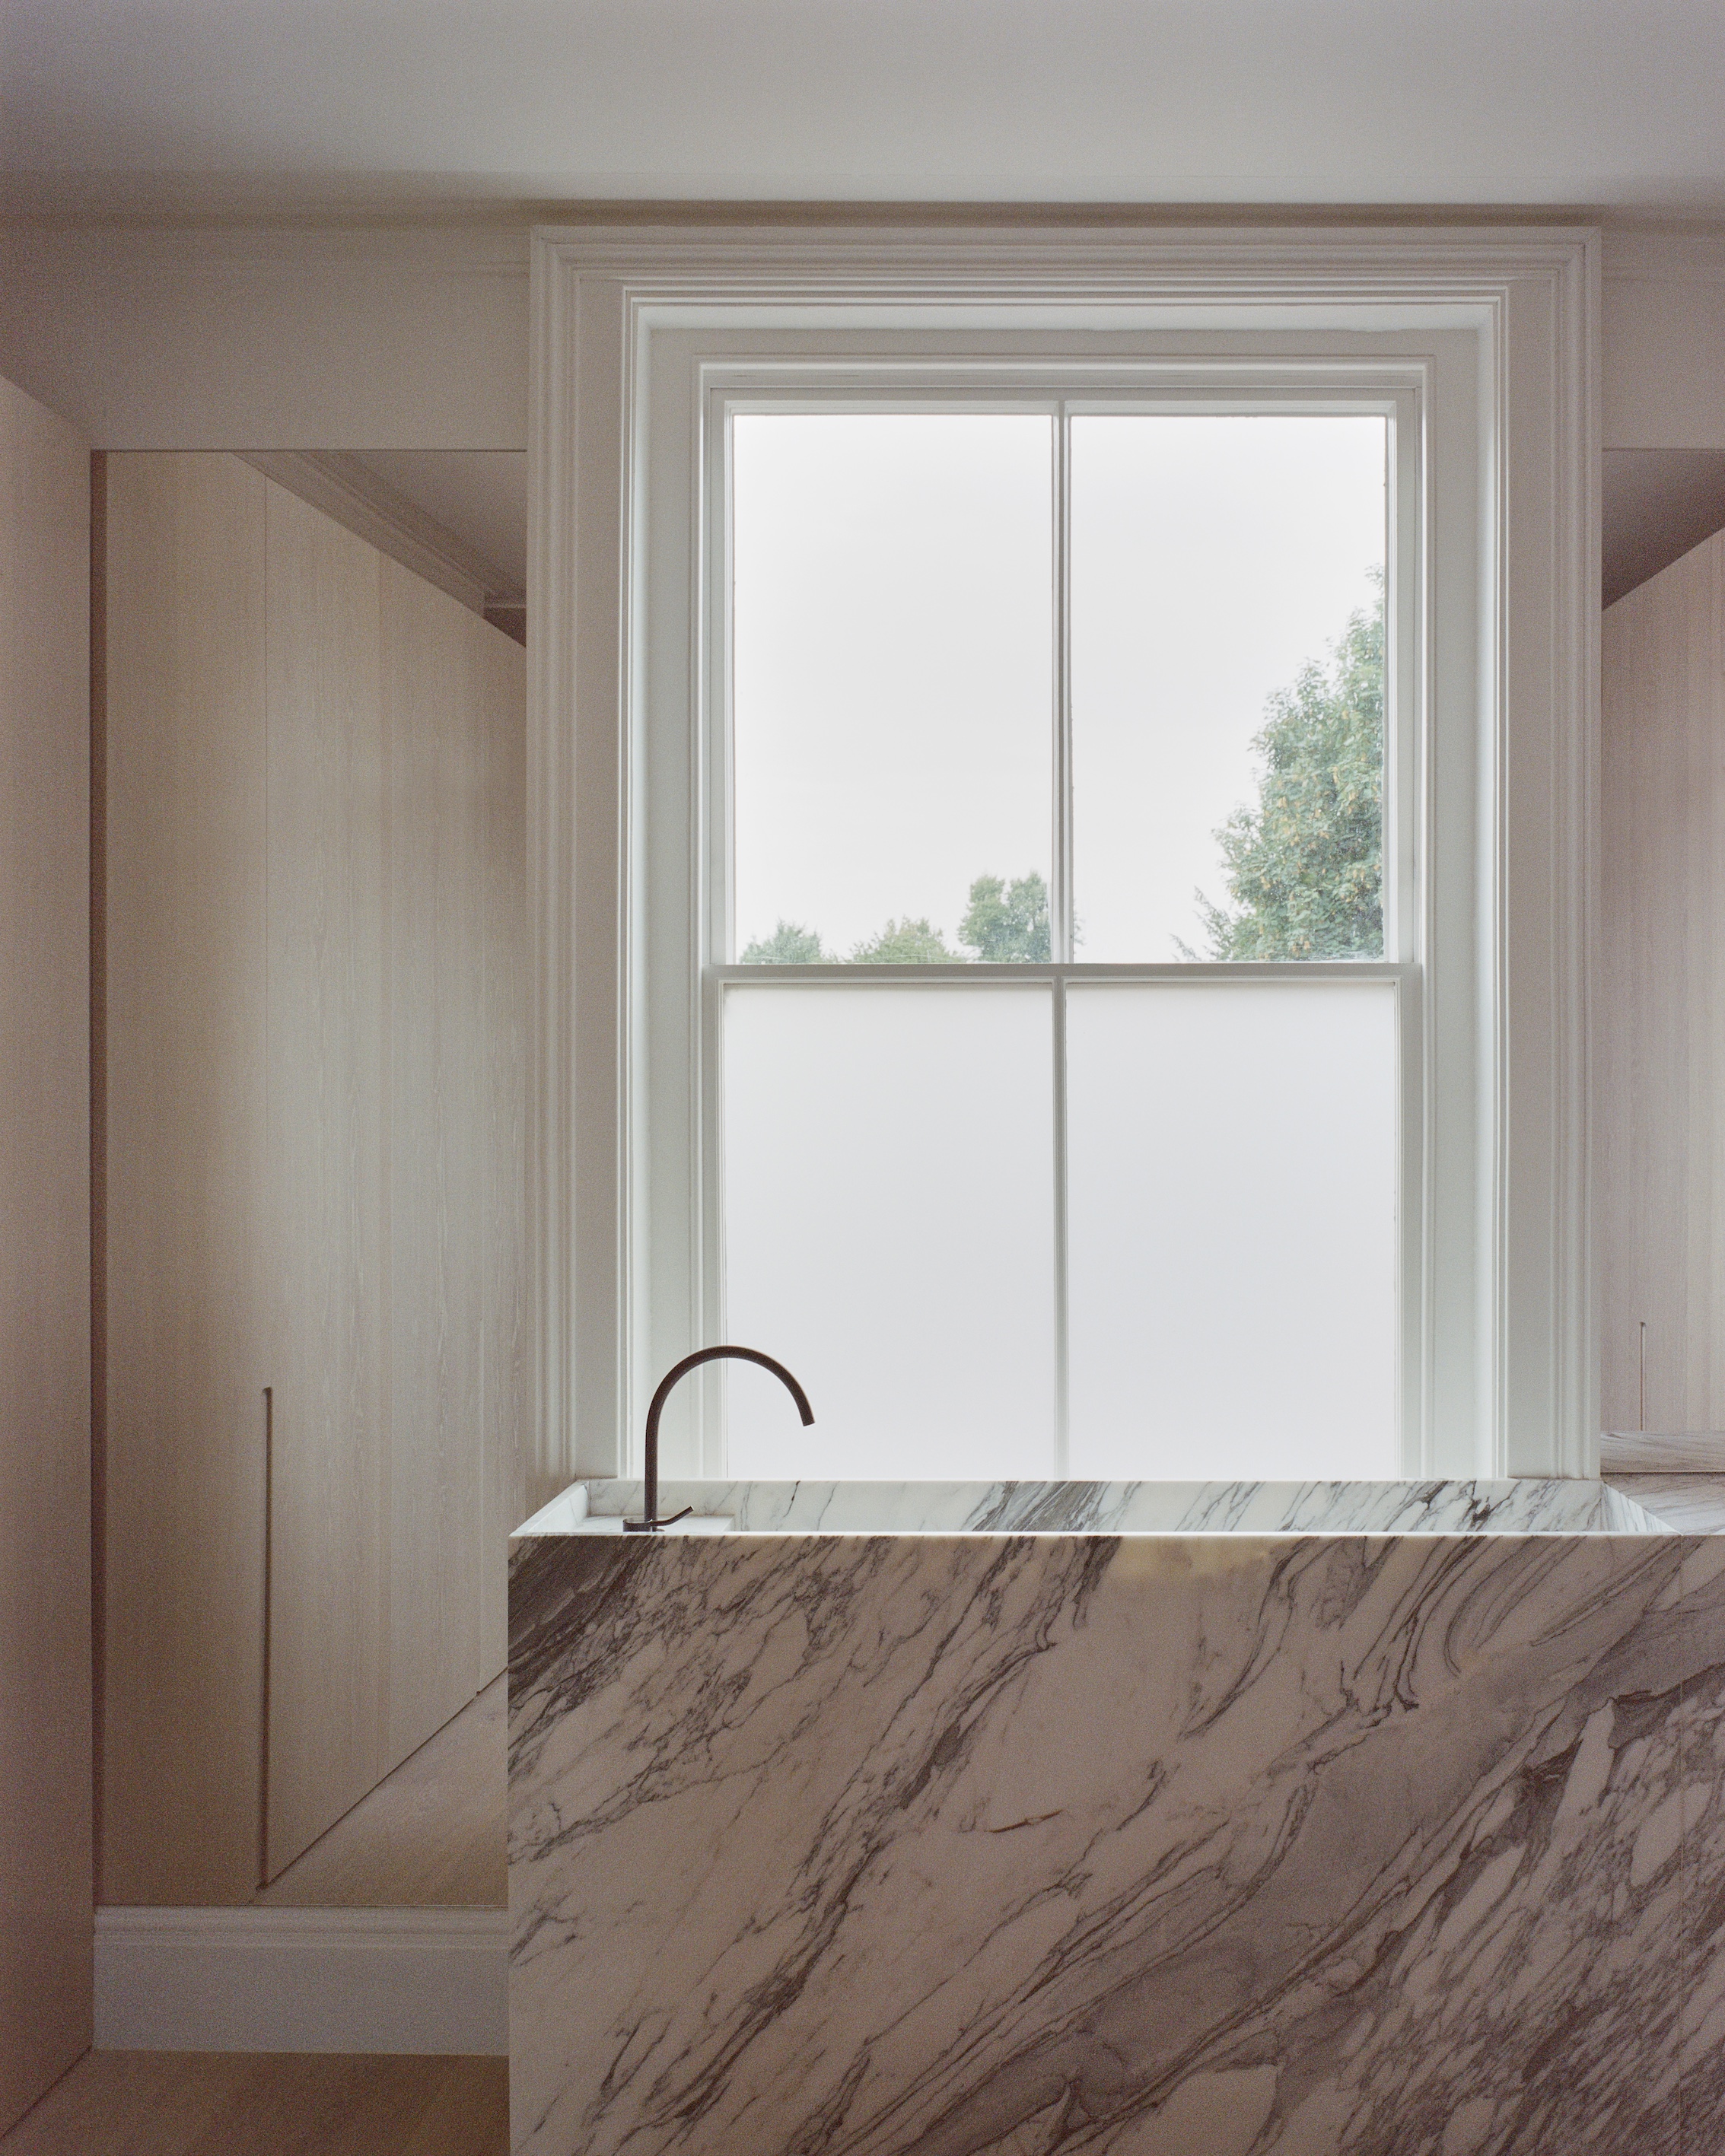 an arabescato corchia marble clad sink. note that in lieu of a window covering, 27